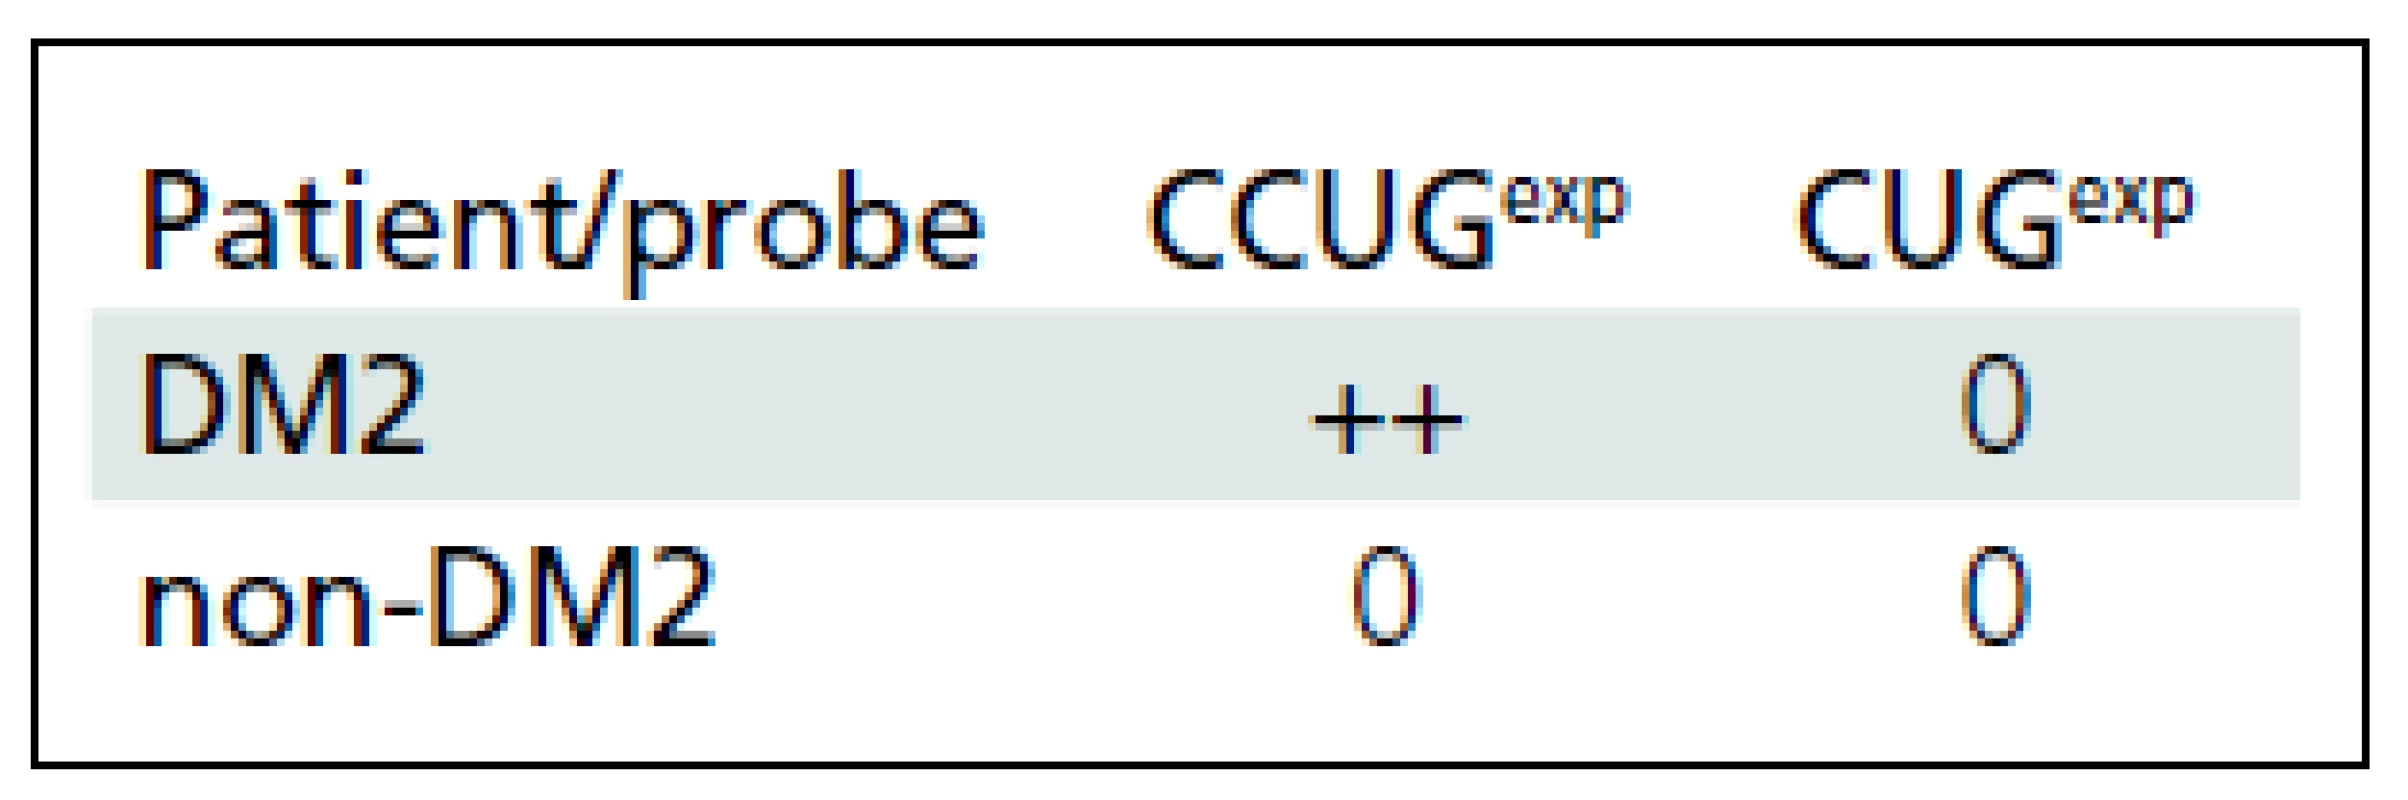 Reaction of lymphocytes with CUG/CCUG probes in DM2 and non-DM2 patients. Positive reactivity with CCUG&lt;sup&gt;exp&lt;/sup&gt; probe identified in lymphocytes from DM2 patients only.